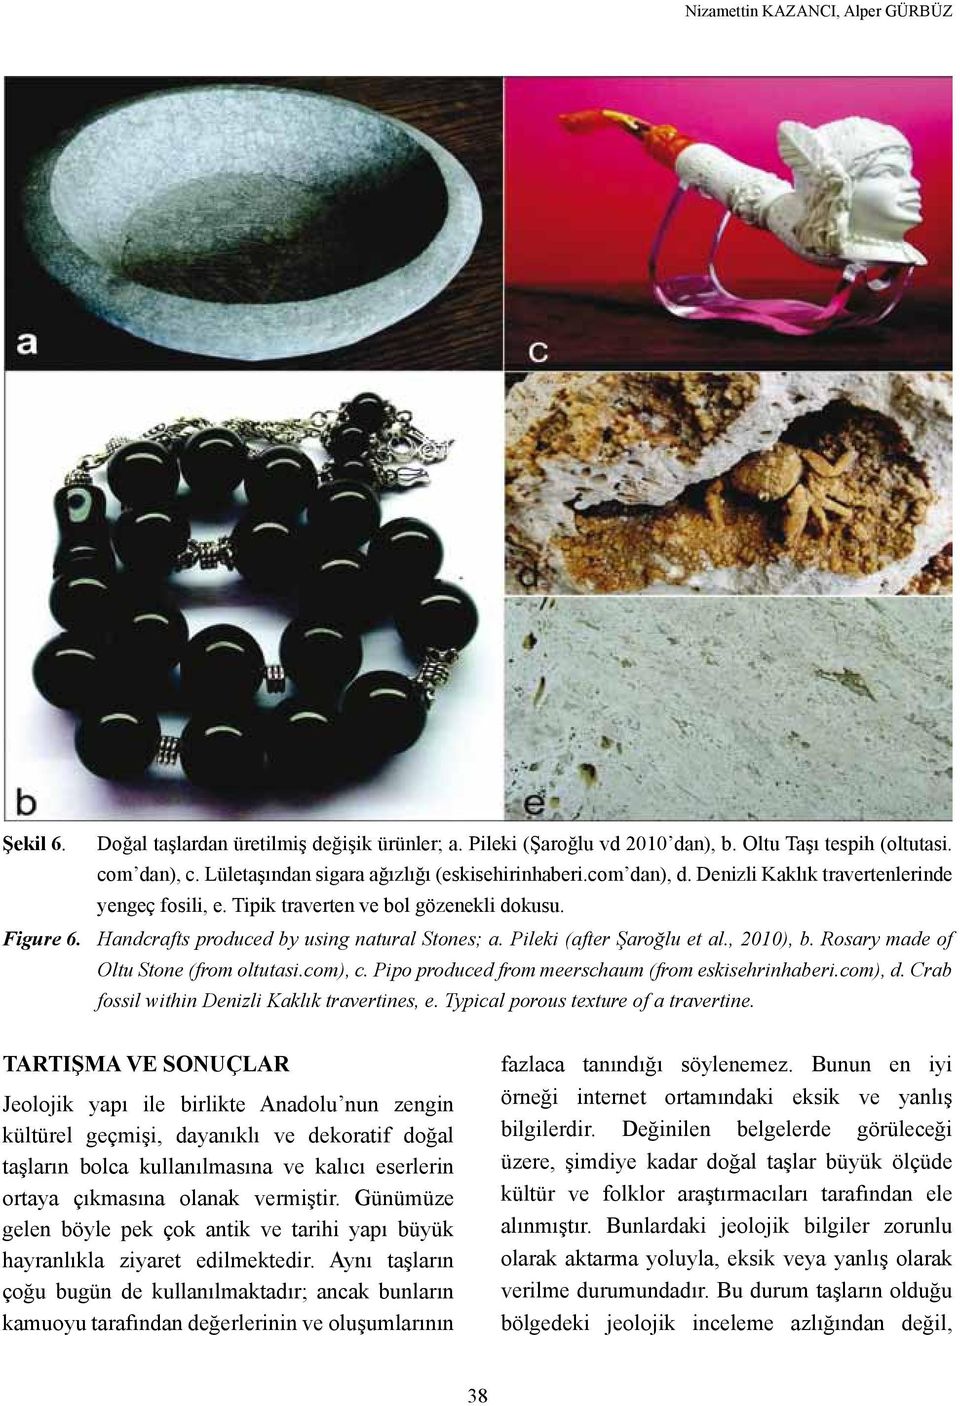 Handcrafts produced by using natural Stones; a. Pileki (after Şaroğlu et al., 2010), b. Rosary made of Oltu Stone (from oltutasi.com), c. Pipo produced from meerschaum (from eskisehrinhaberi.com), d.